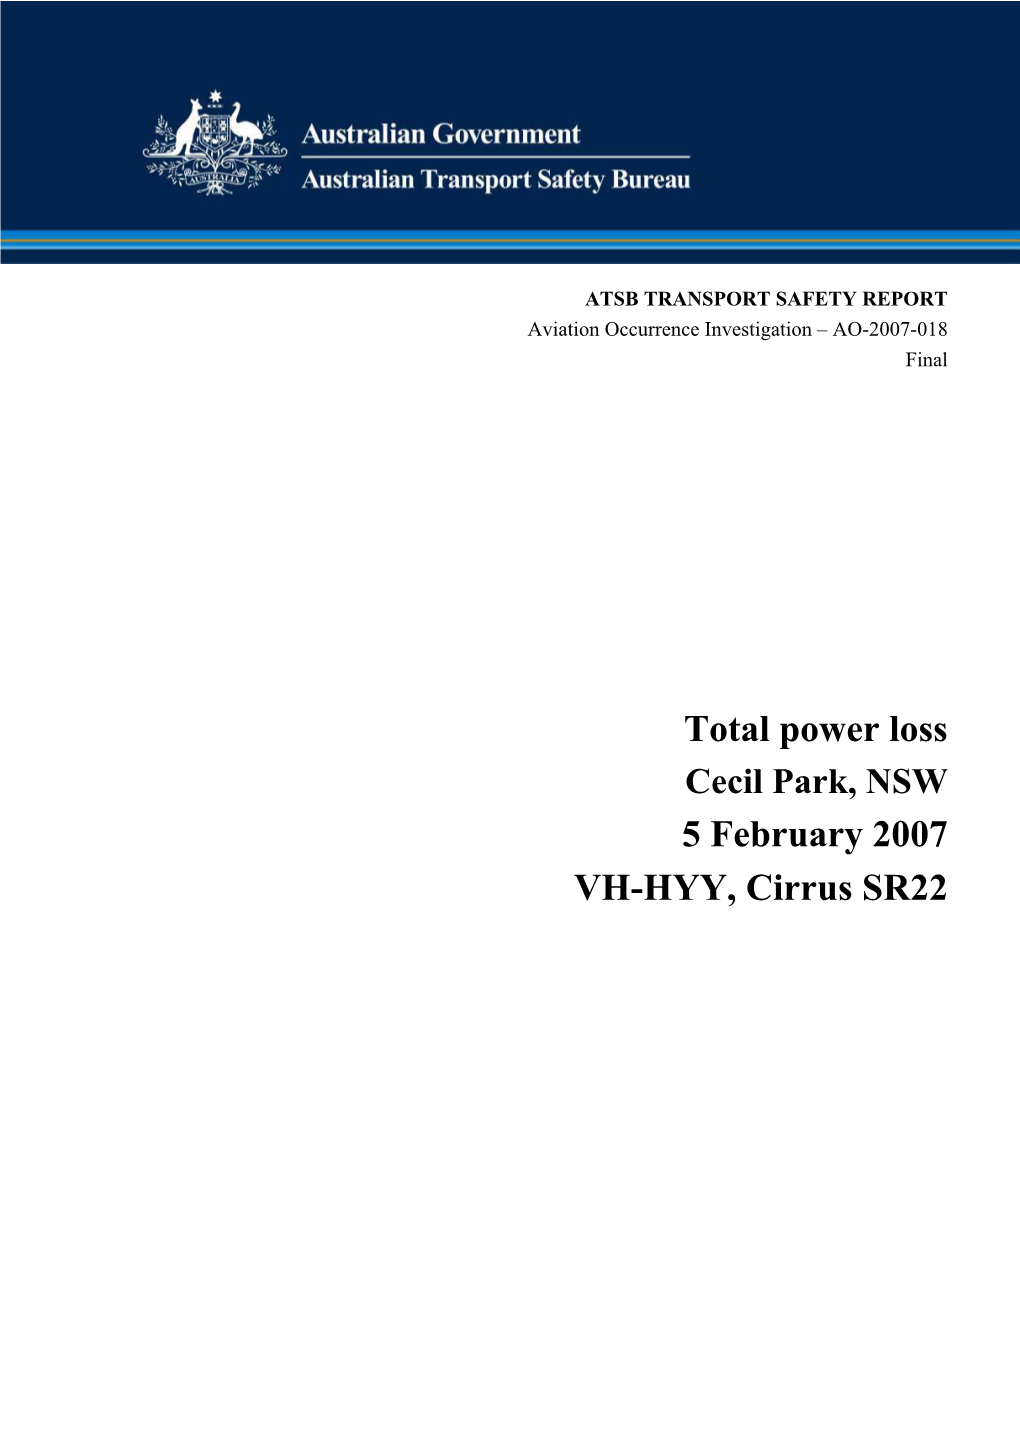 Total Power Loss, Cecil Park, NSW, 5 February 2007, VH-HYY, Cirrus SR22